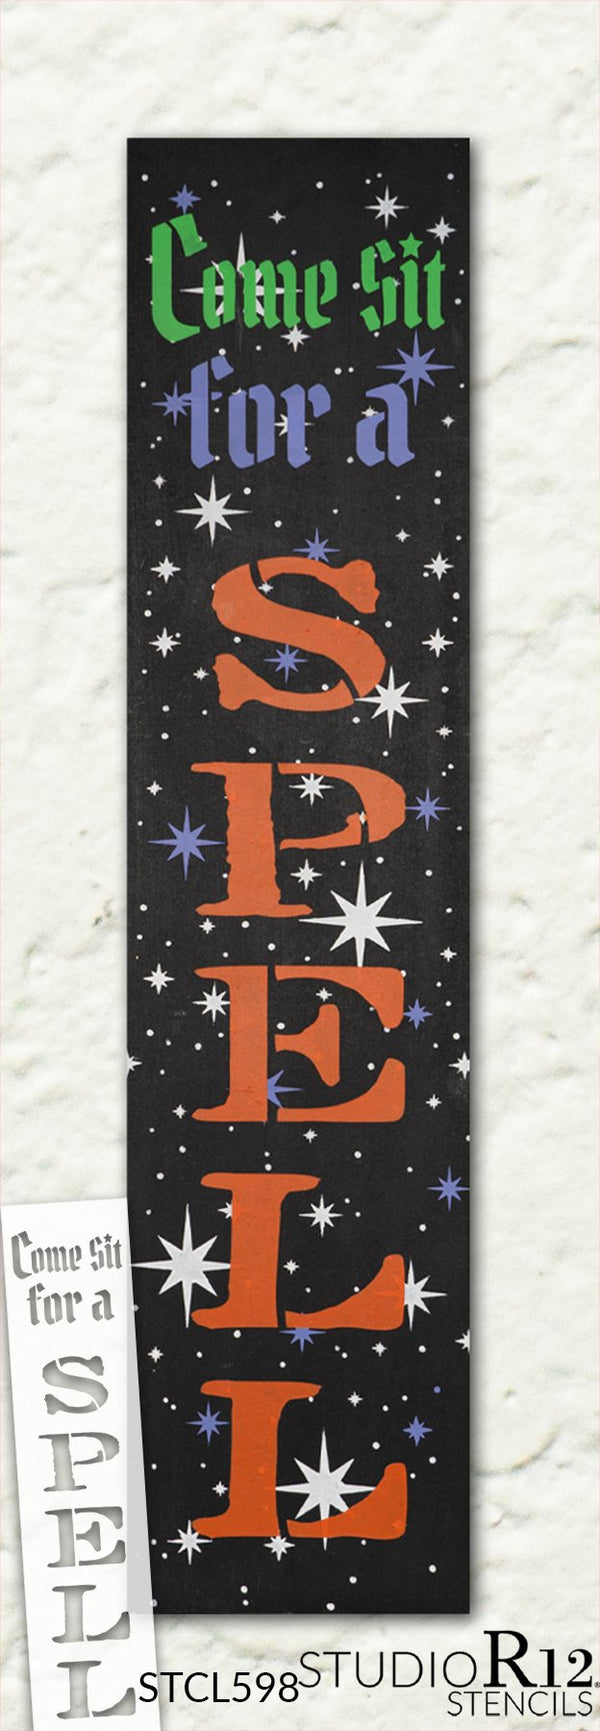 Come Sit for a Spell Stencil by StudioR12 | Craft DIY Halloween Home Decor | Paint Fall Porch Wood Sign | Reusable Mylar Template | Select Size | STCL5928